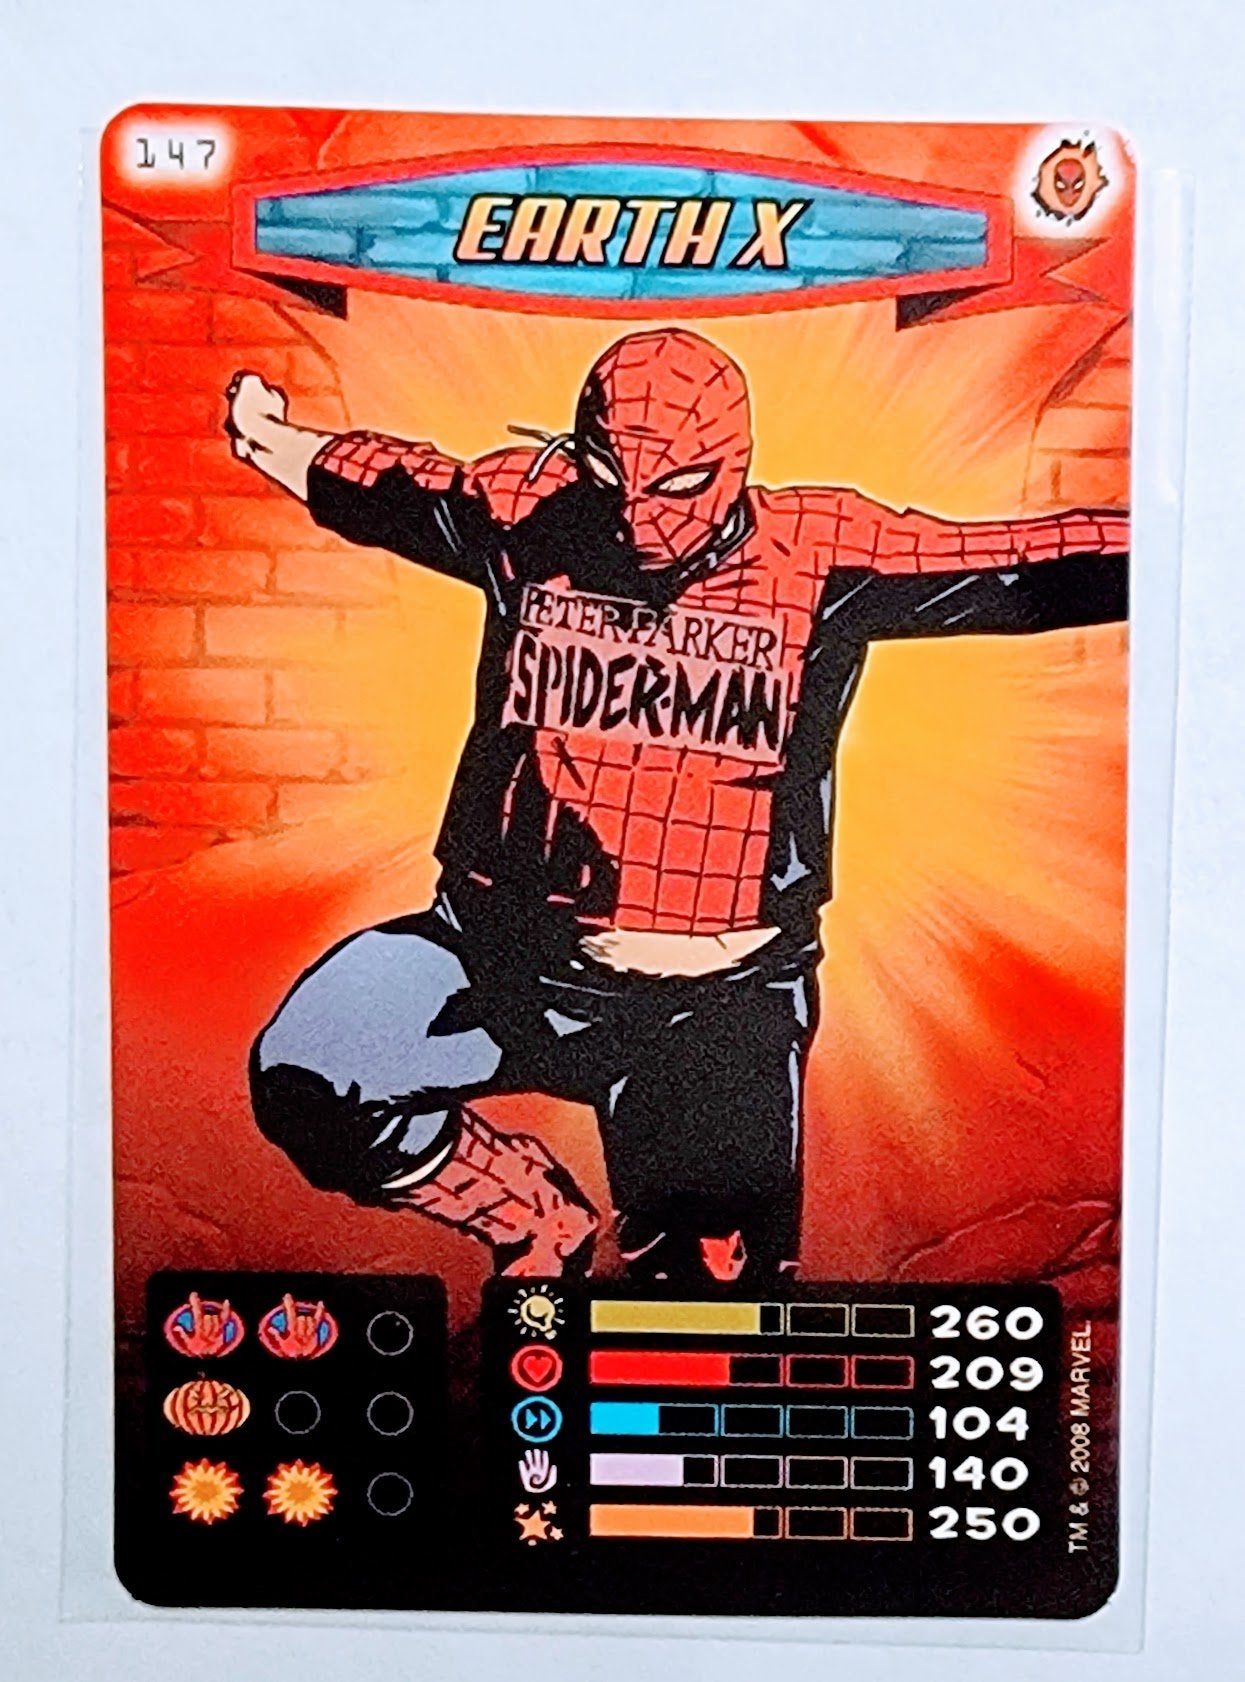 2008 Spiderman Heroes and Villians Earth X #147 Marvel Booster Trading Card UPTI simple Xclusive Collectibles   